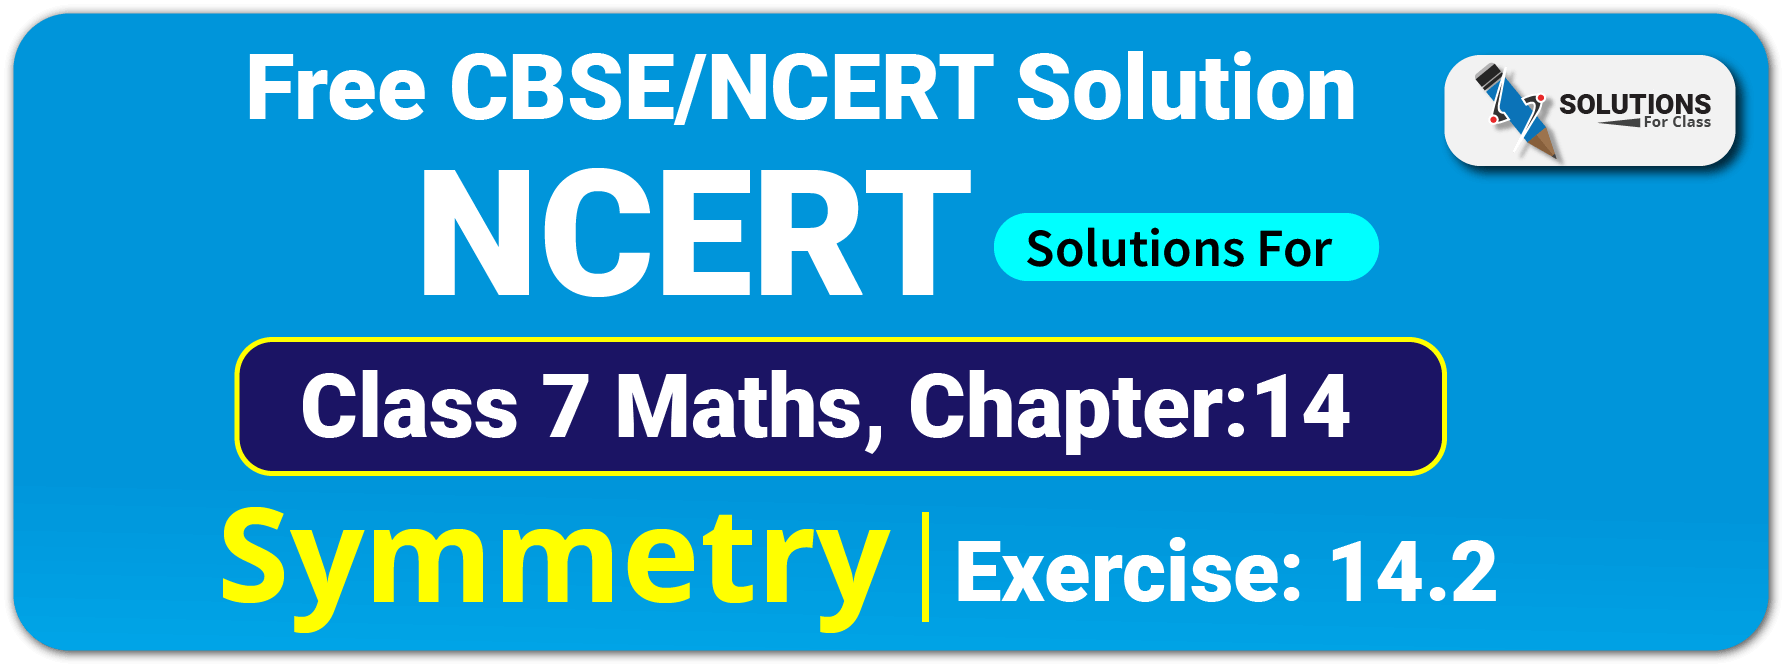 NCERT Solutions For Class 7 Maths Chapter 14 Symmetry Exercise 14.2